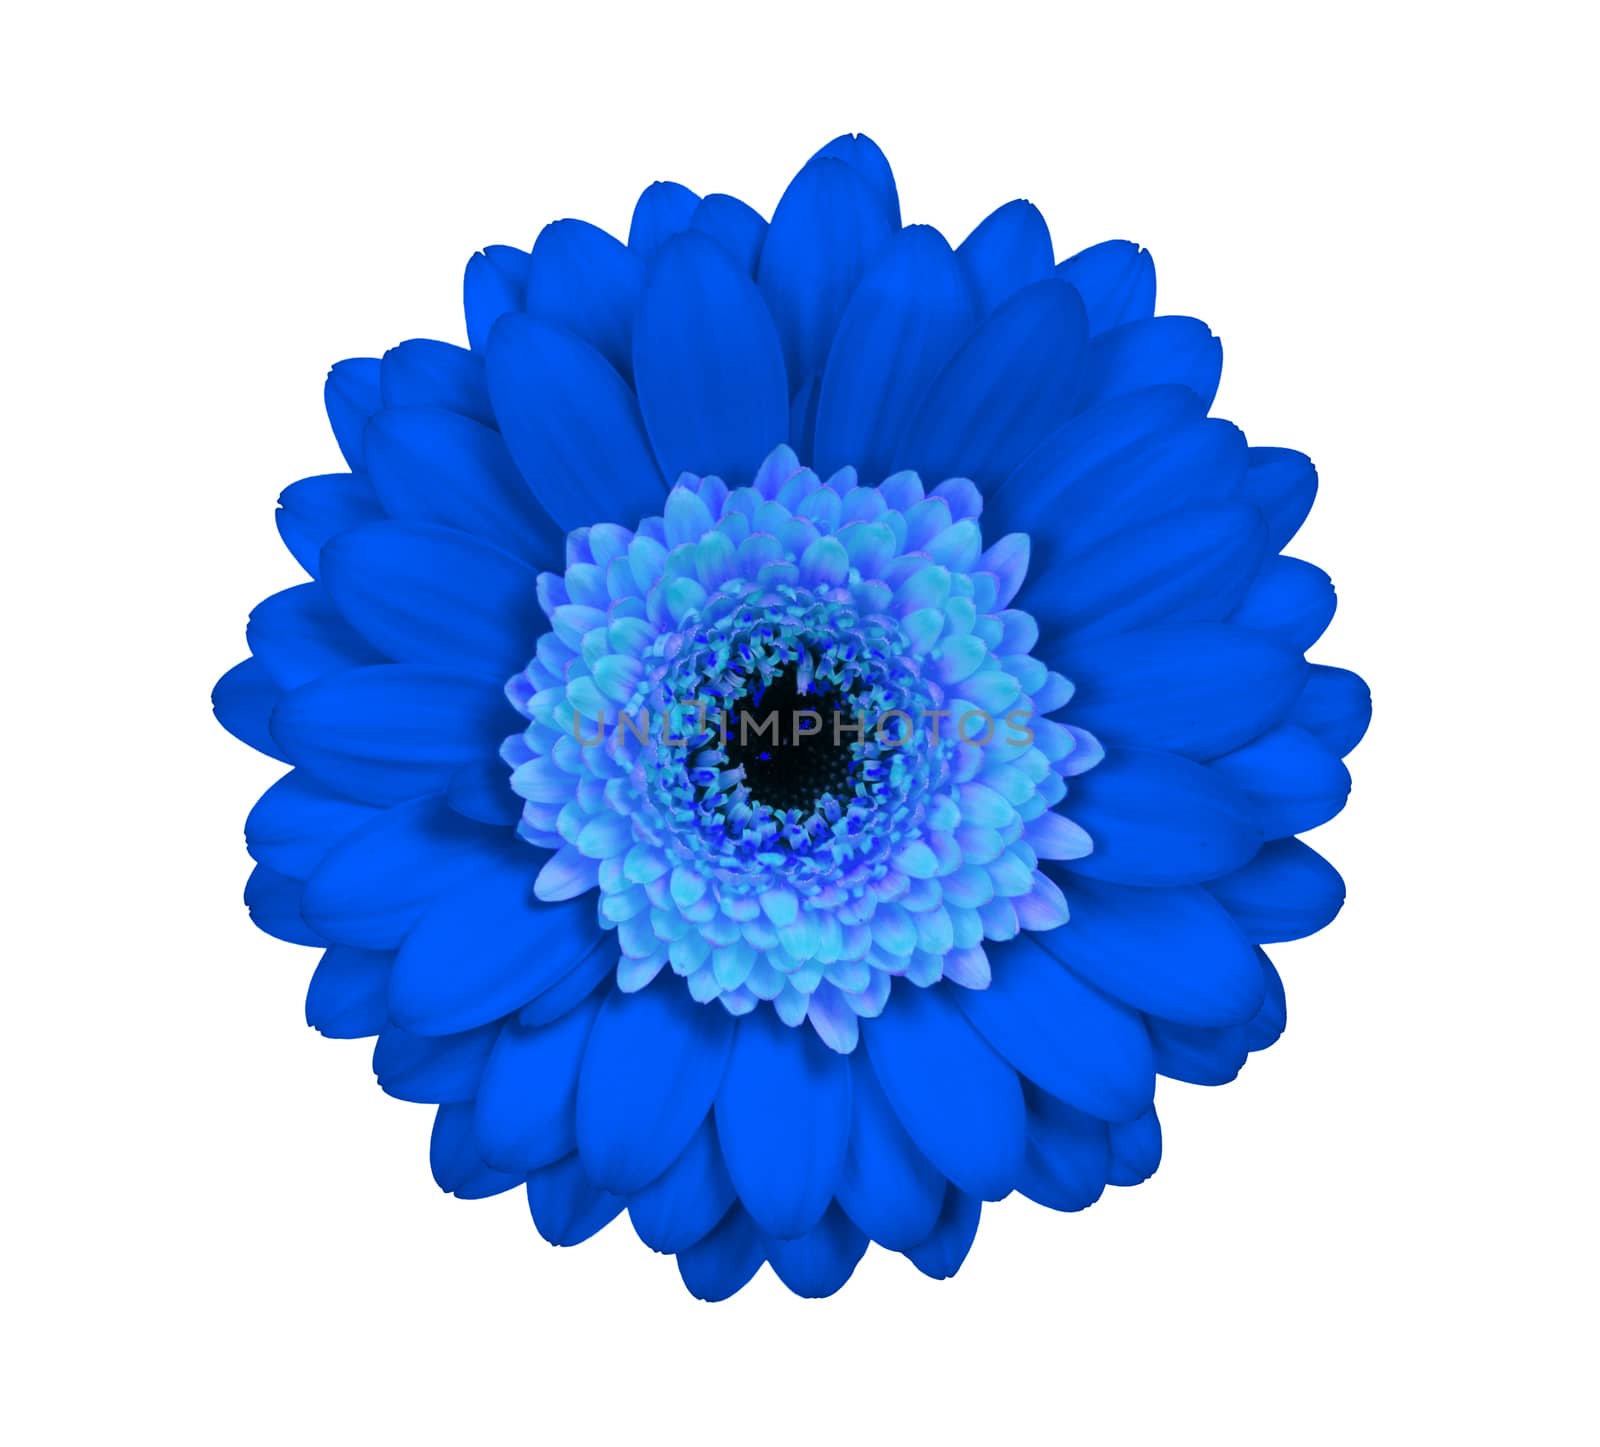 Gerbera flower isolated on a white background, blue